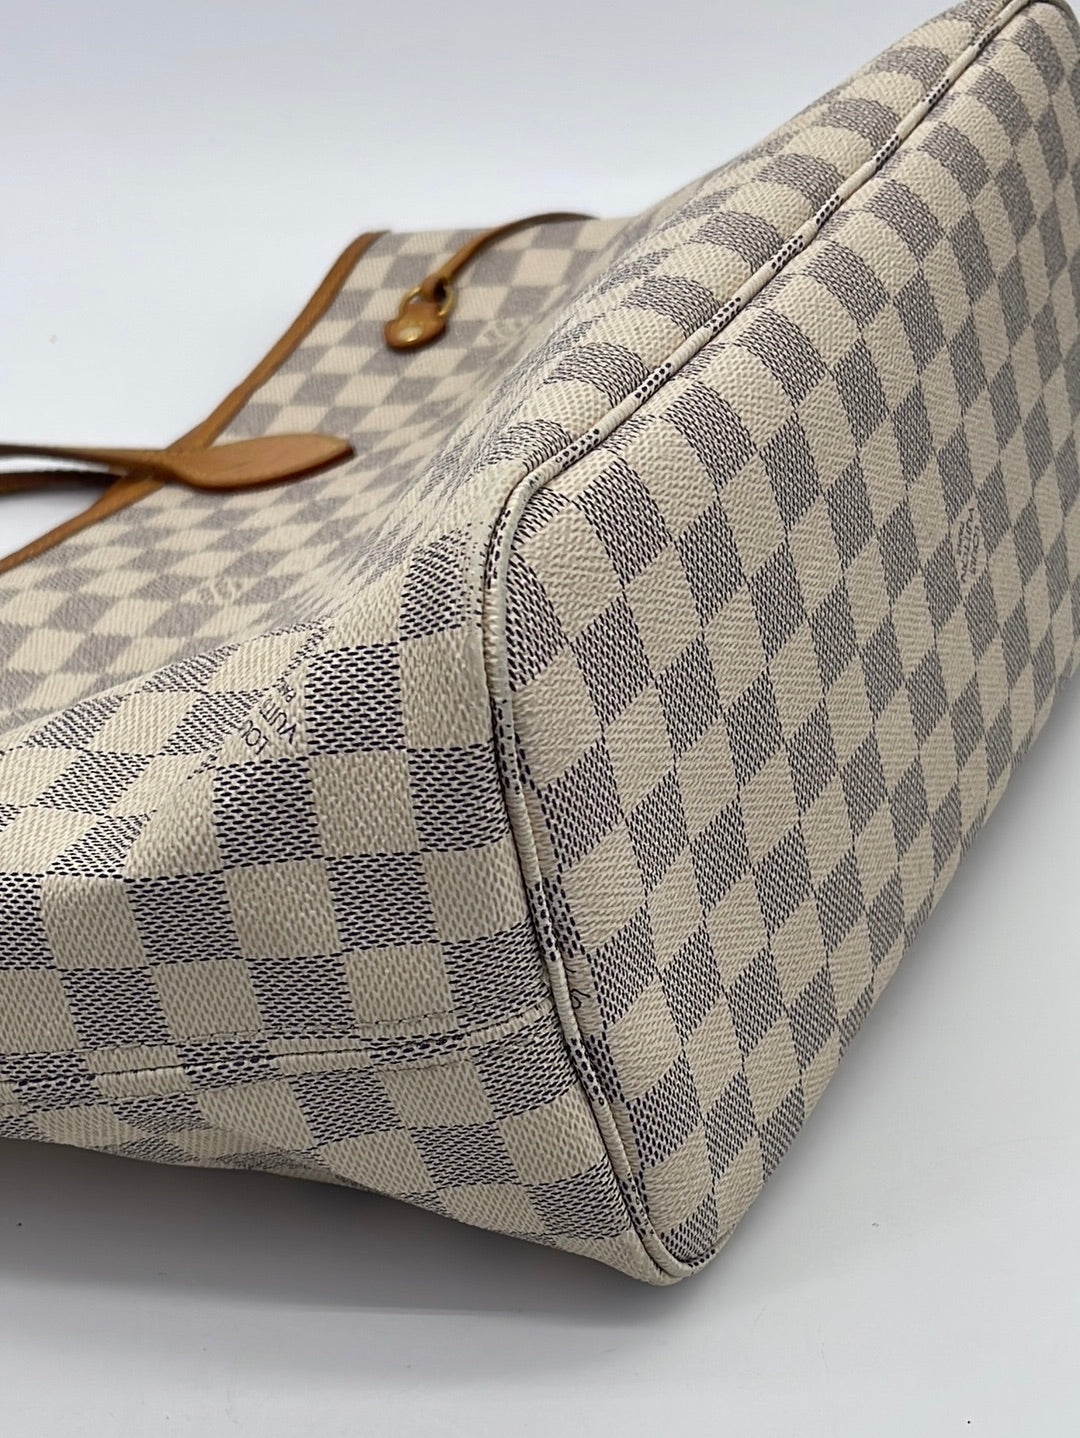 PRELOVED Louis Vuitton Damier Azur Neverfull PM Tote SD4181 051523